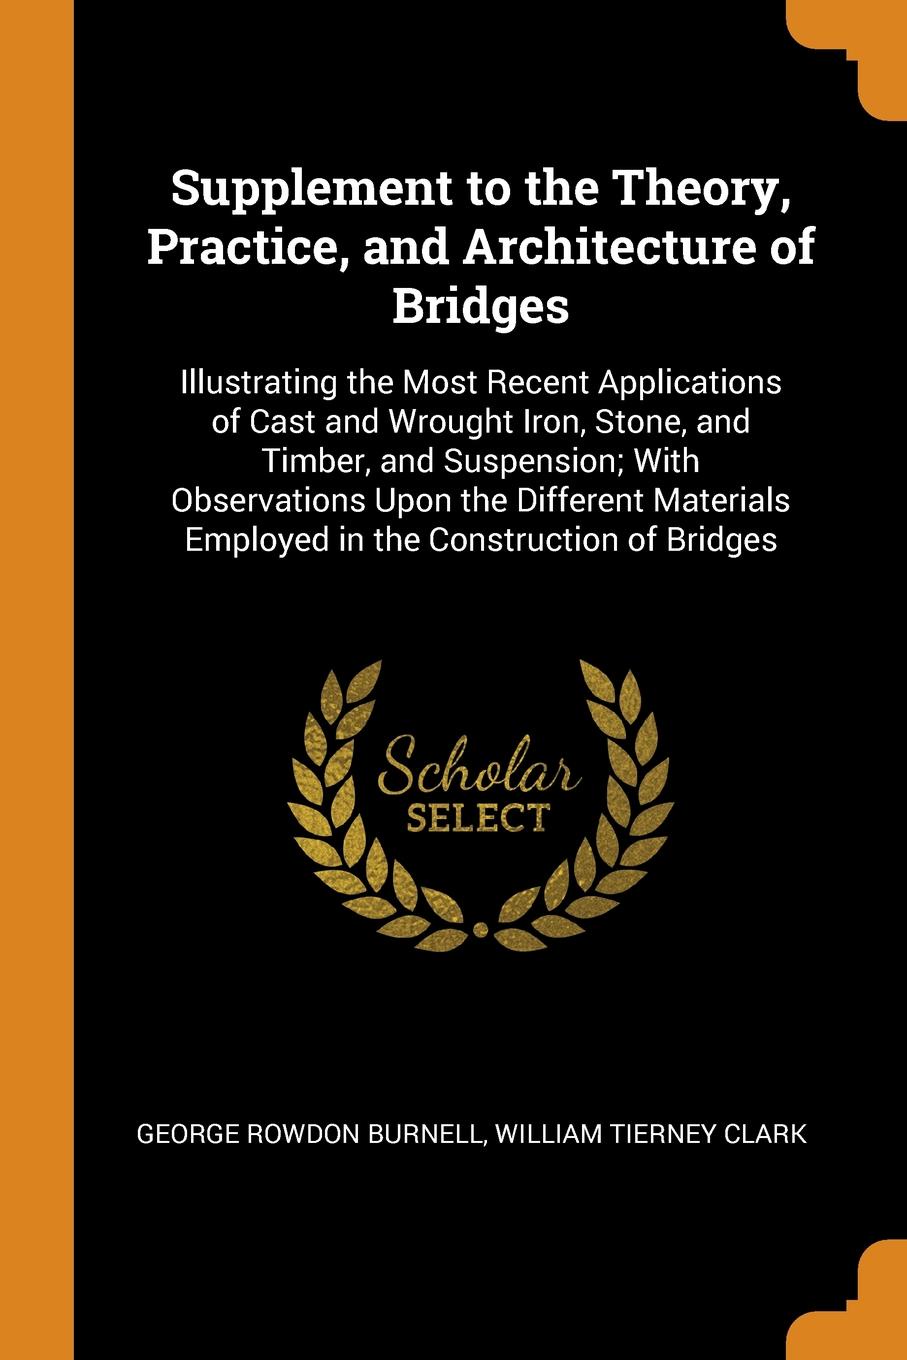 Supplement to the Theory, Practice, and Architecture of Bridges. Illustrating the Most Recent Applications of Cast and Wrought Iron, Stone, and Timber, and Suspension; With Observations Upon the Different Materials Employed in the Construction of ...